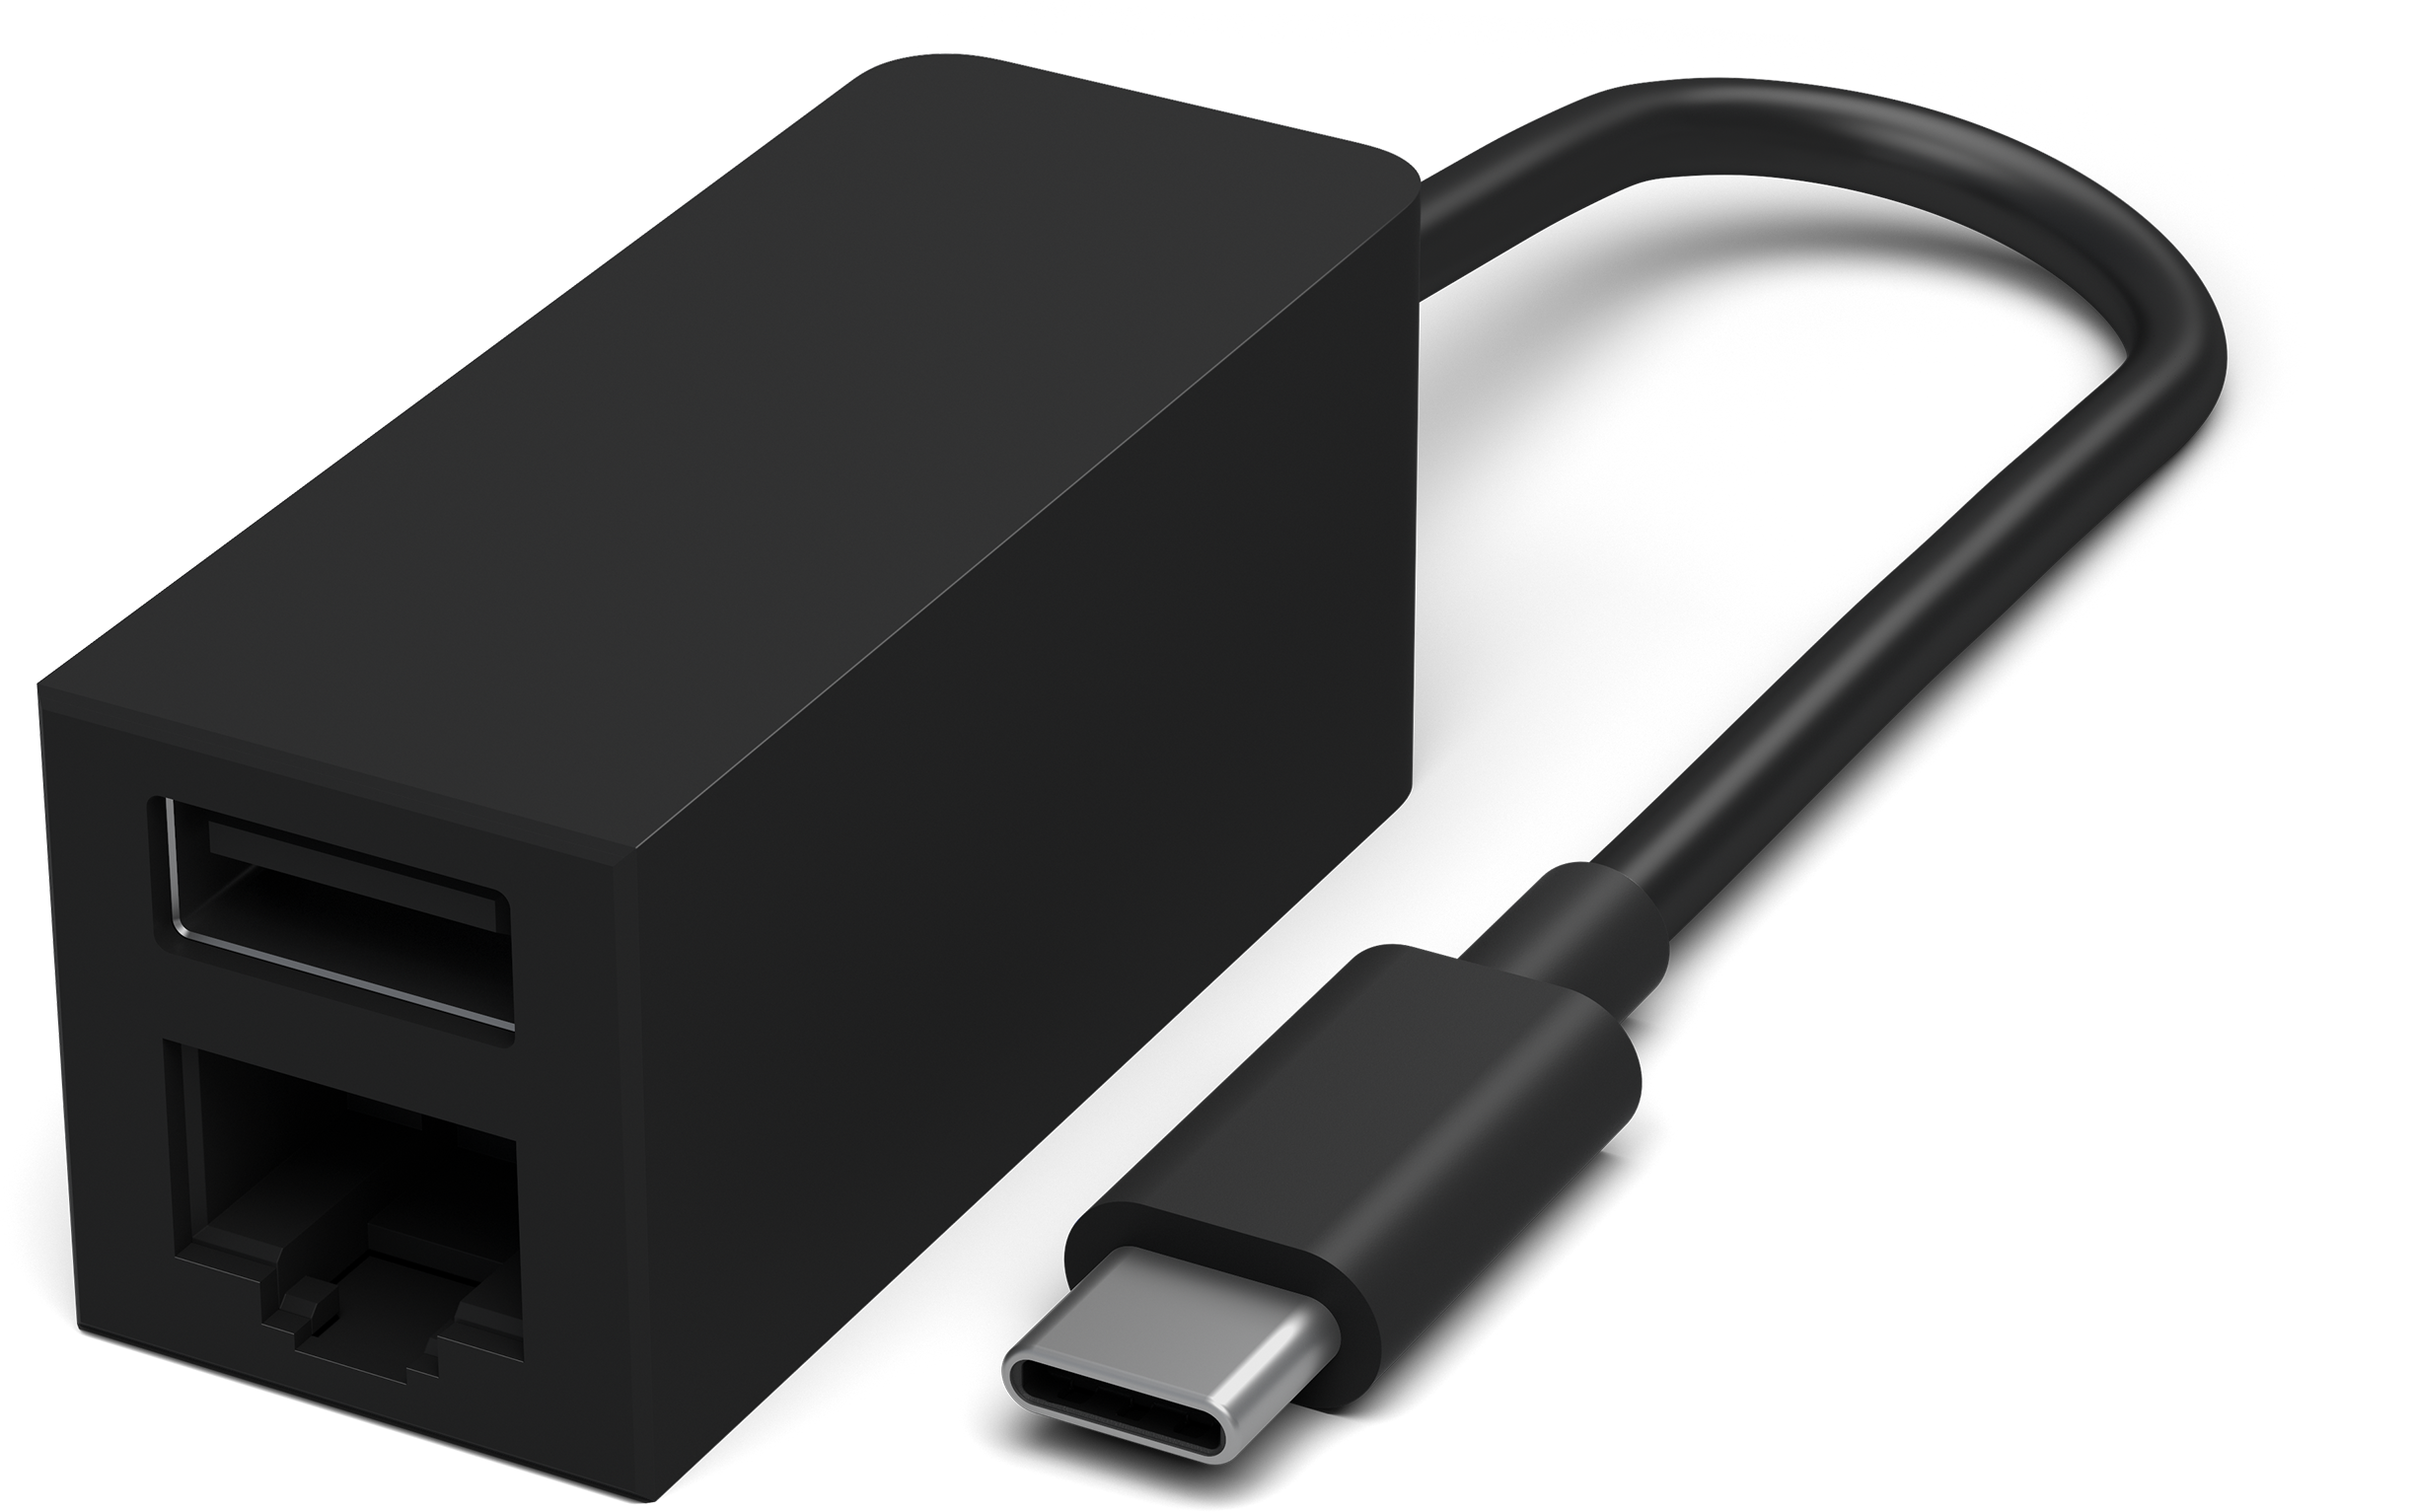 Microsoft to Ethernet and USB Adapter - Microsoft Store